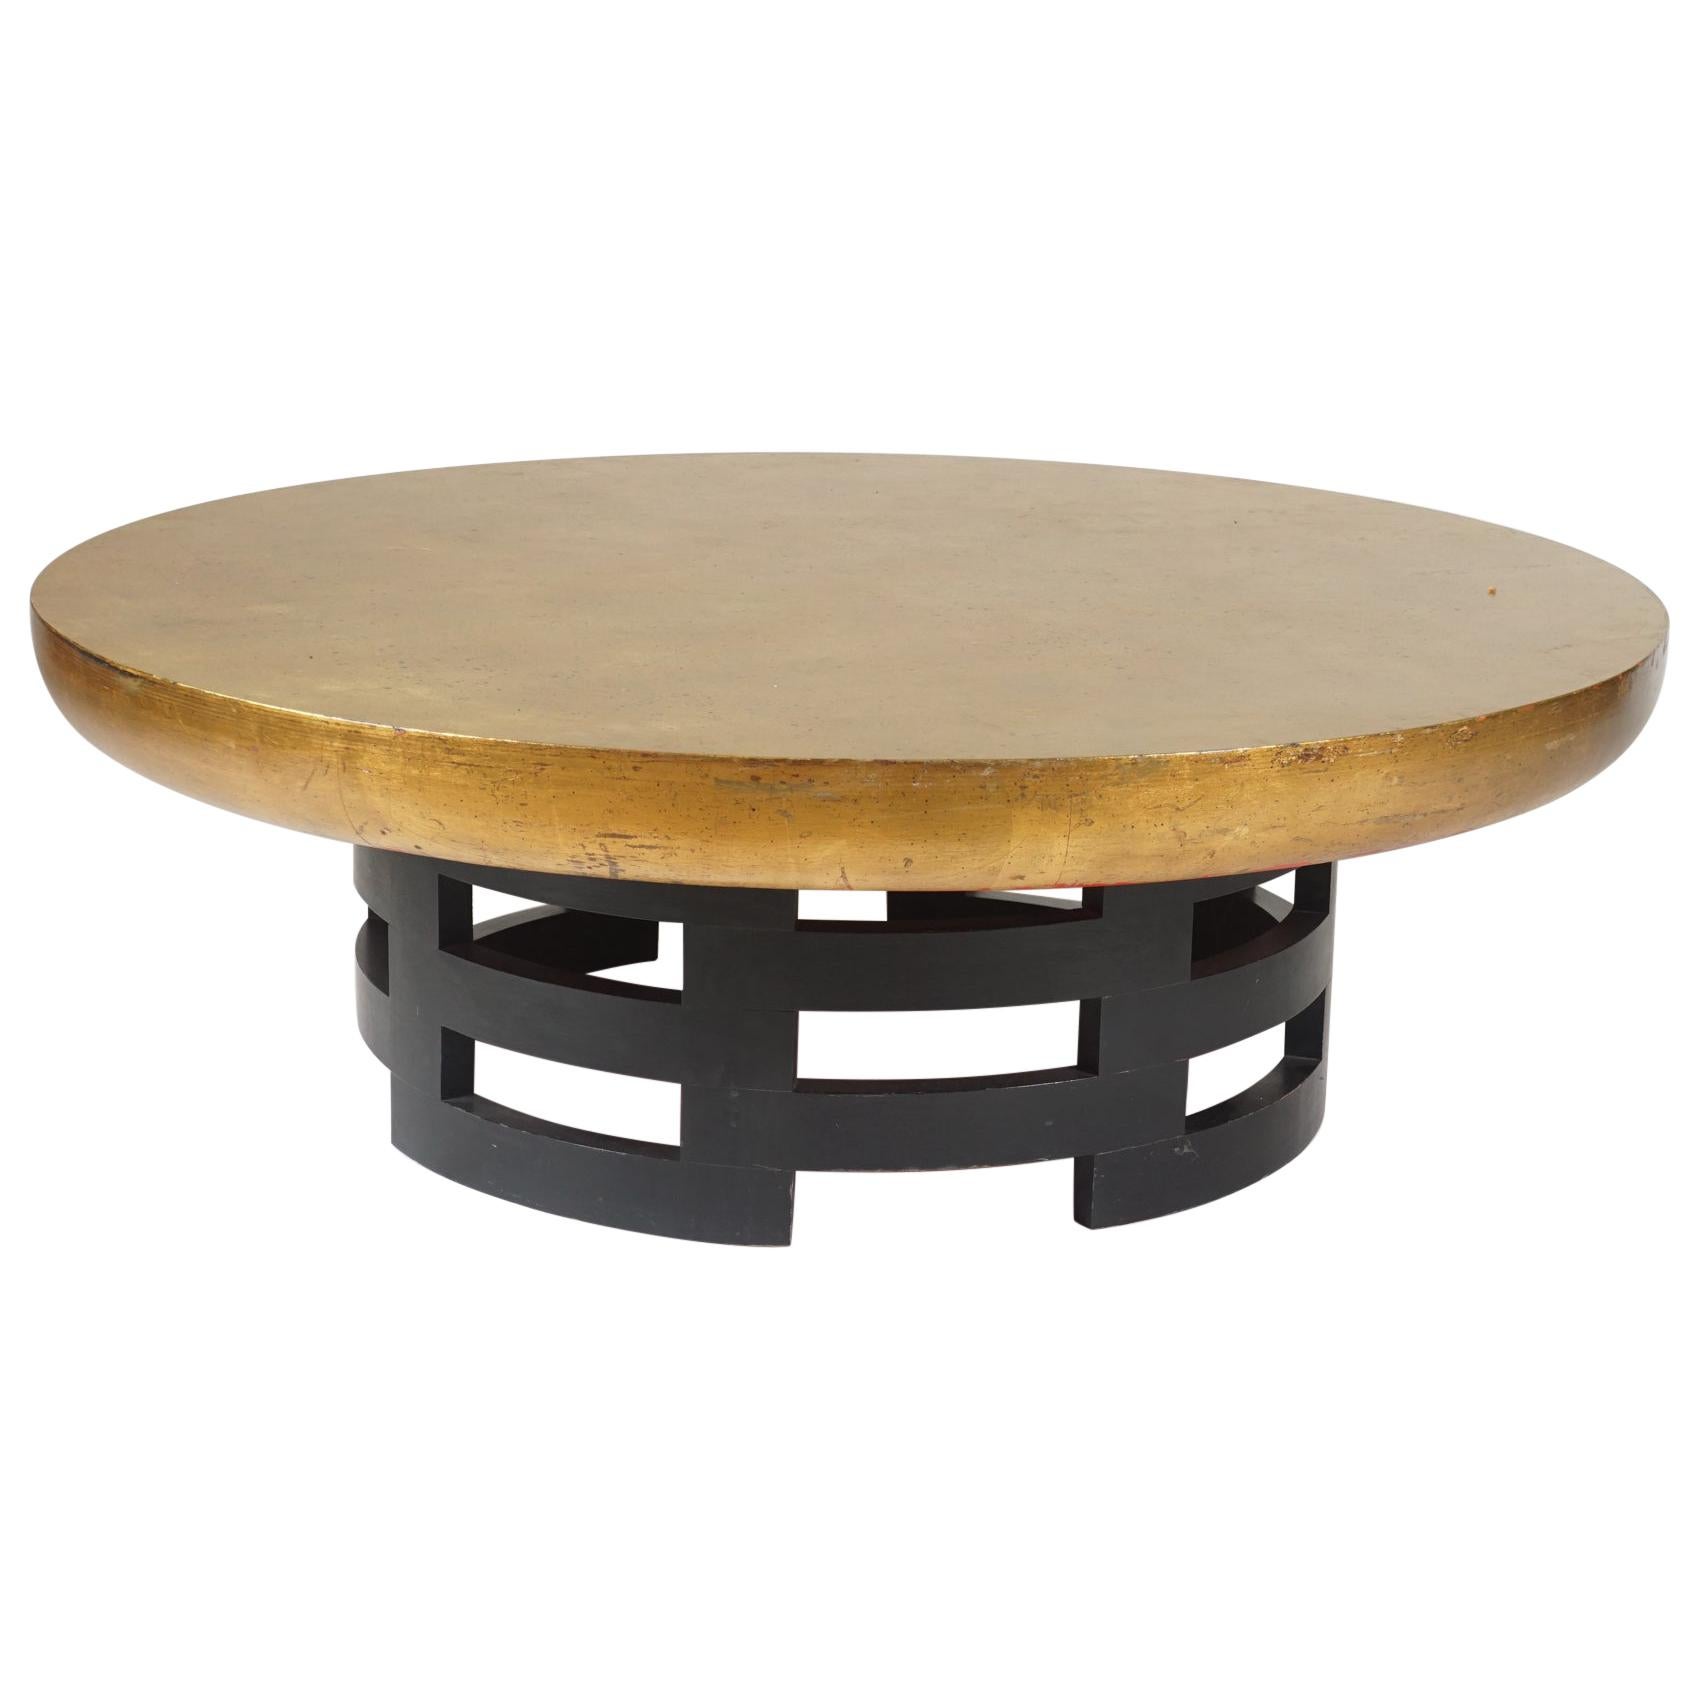 Low Circular Table in the Manner of James Mont